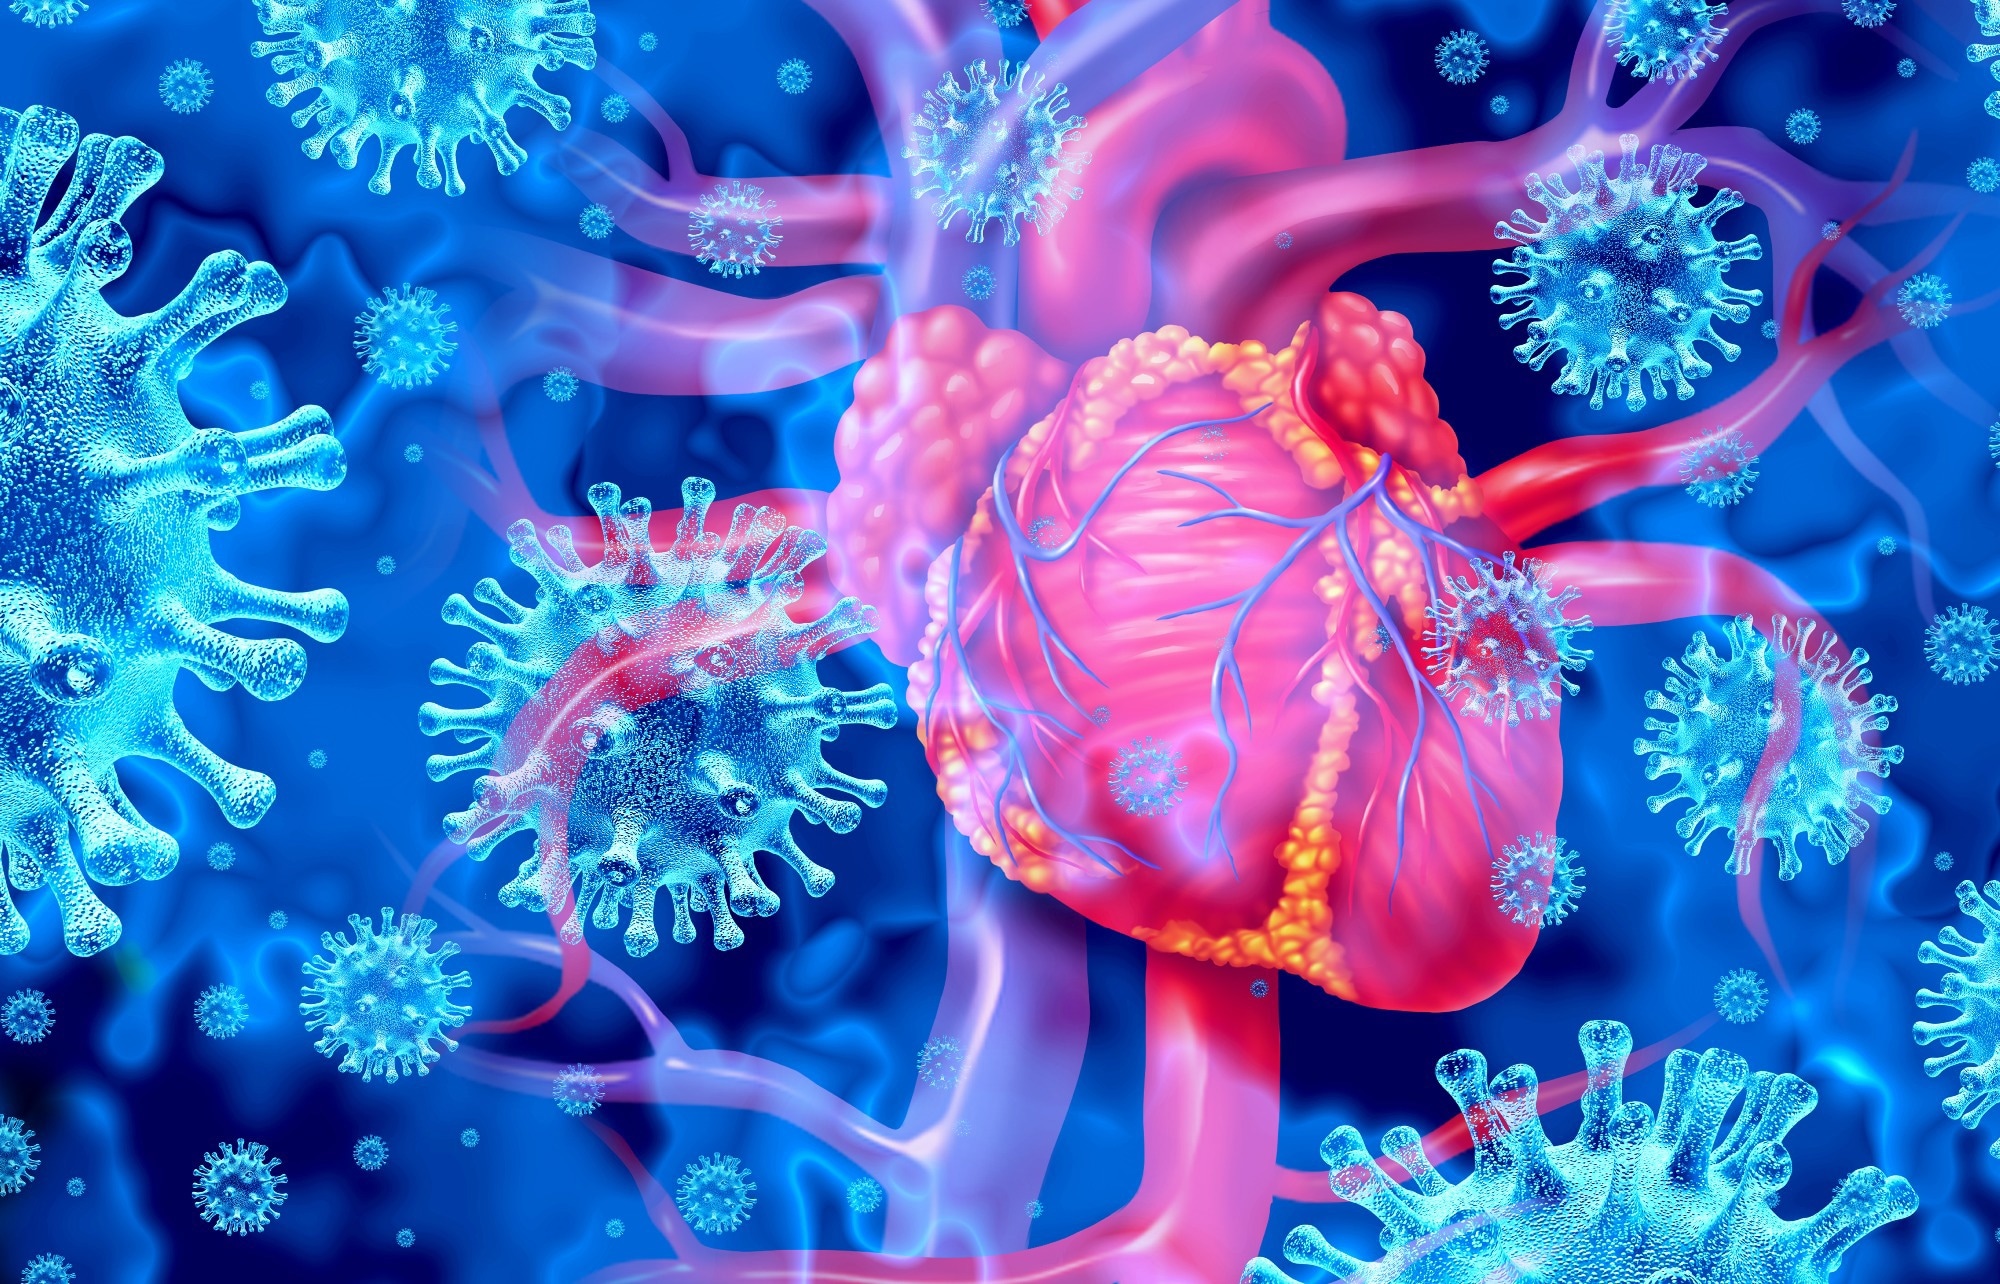 Study: Observed versus expected rates of myocarditis after SARS-CoV-2 vaccination: a population-based cohort study. Image Credit: Lightspring / Shutterstock